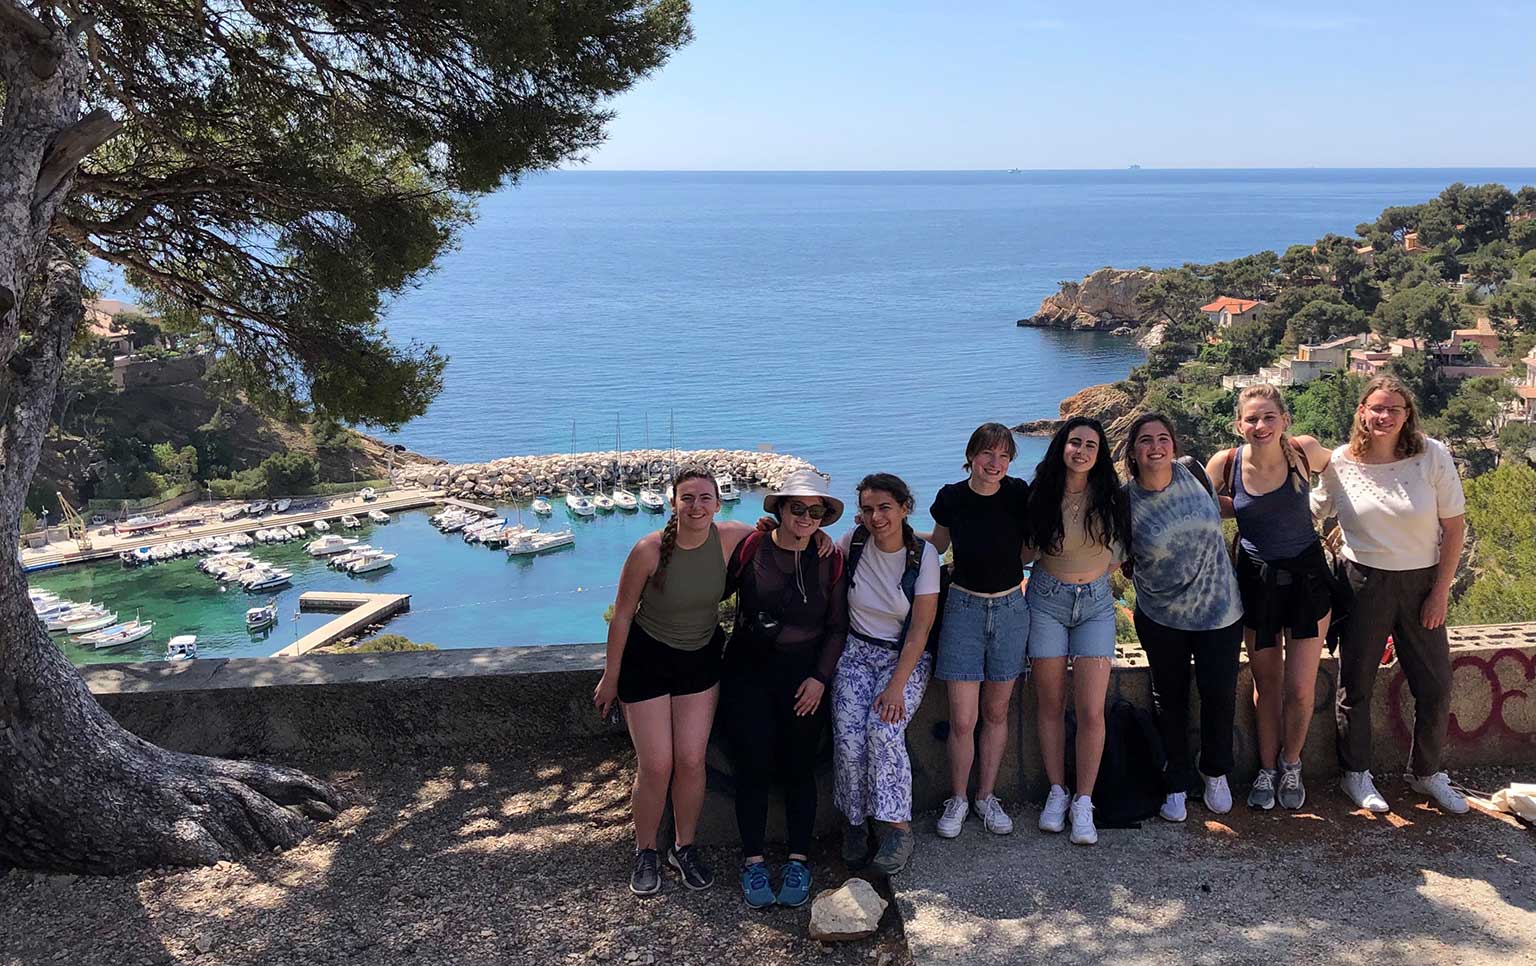 A group of students pose near a cliffside with the ocean in the background.